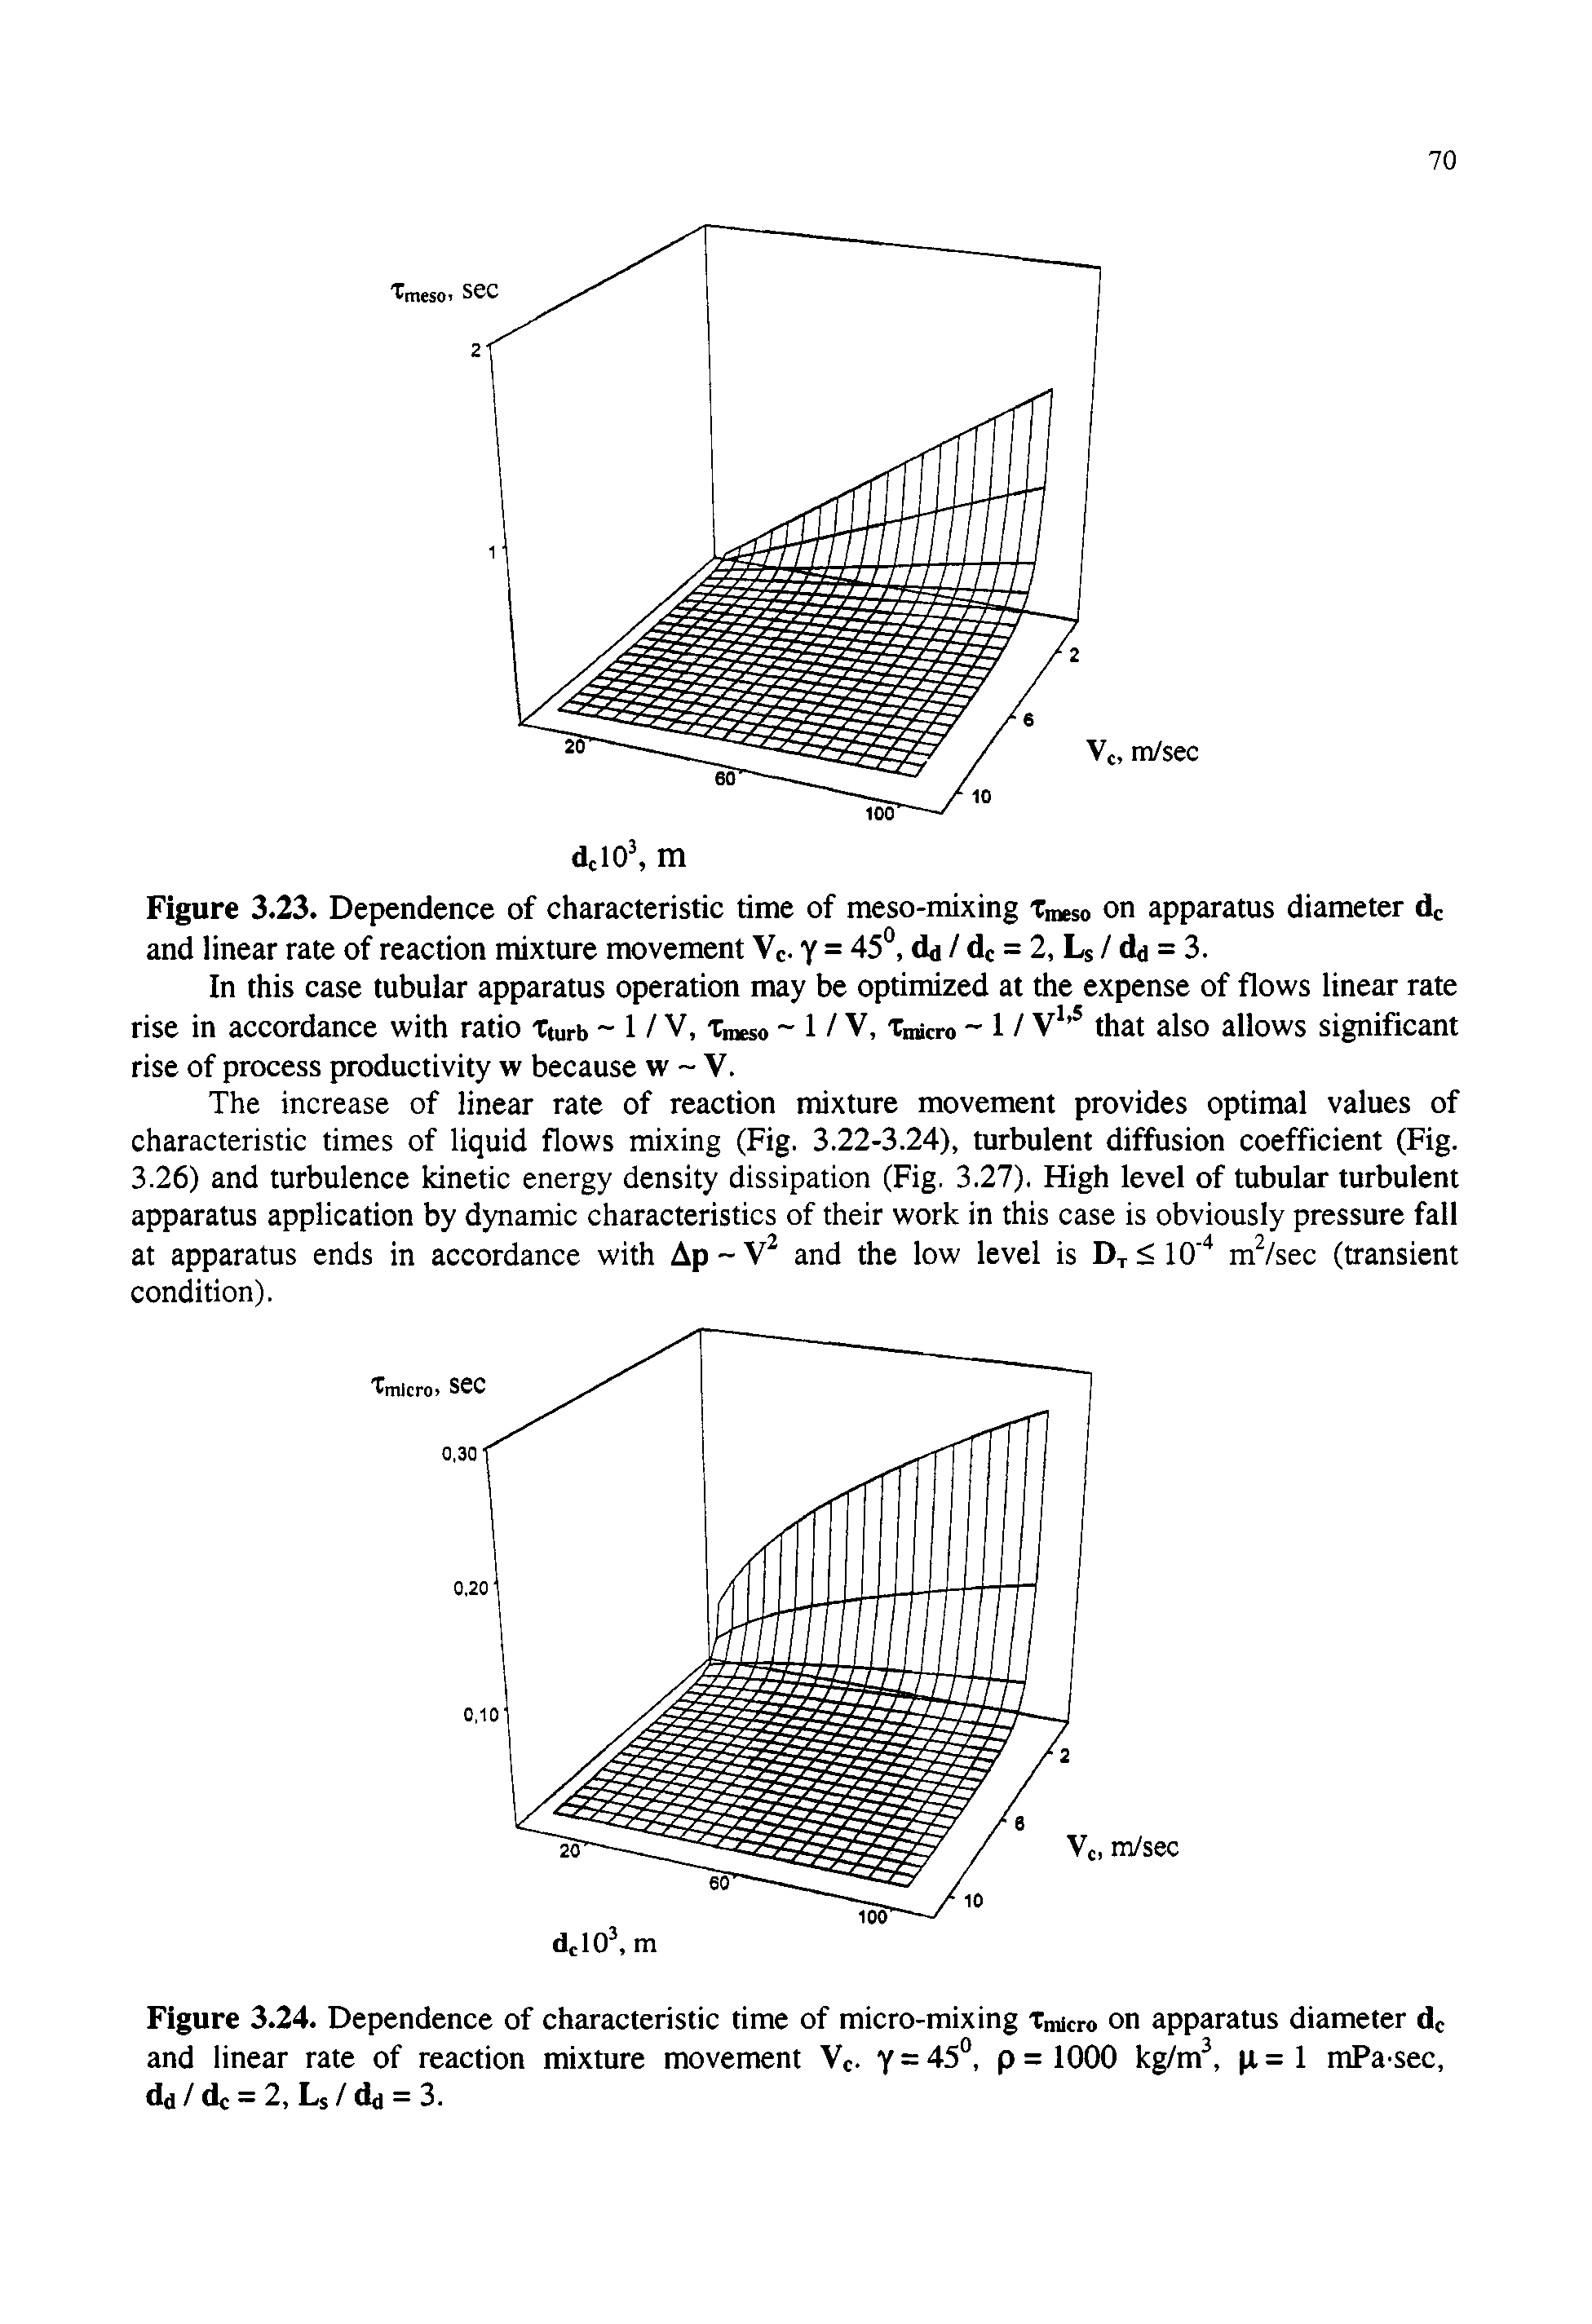 Figure 3.23. Dependence of characteristic time of meso-mixing Tmeso on apparatus diameter dc and linear rate of reaction mixture movement Vc. Y = 45°, dd / dc = 2, Ls / da = 3.